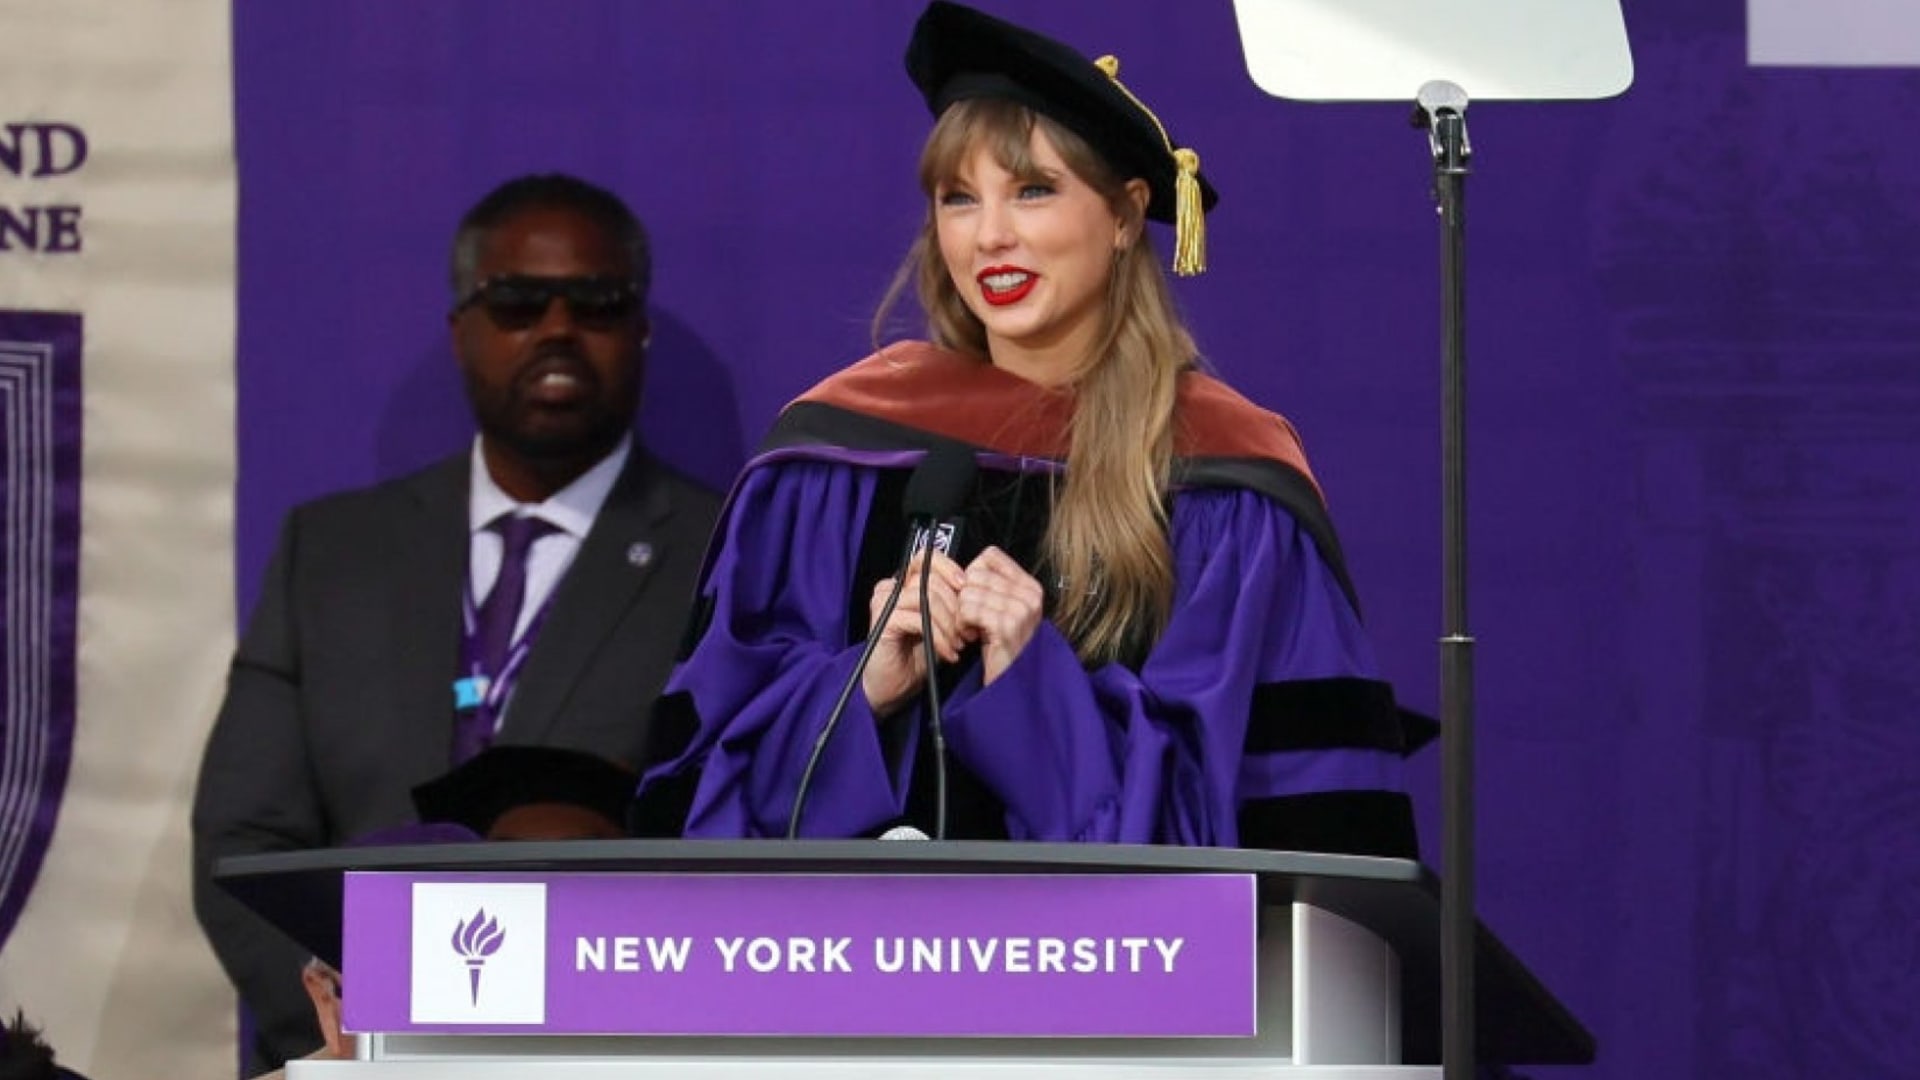 In a 20Minute Commencement Speech, Taylor Swift Explained a Basic